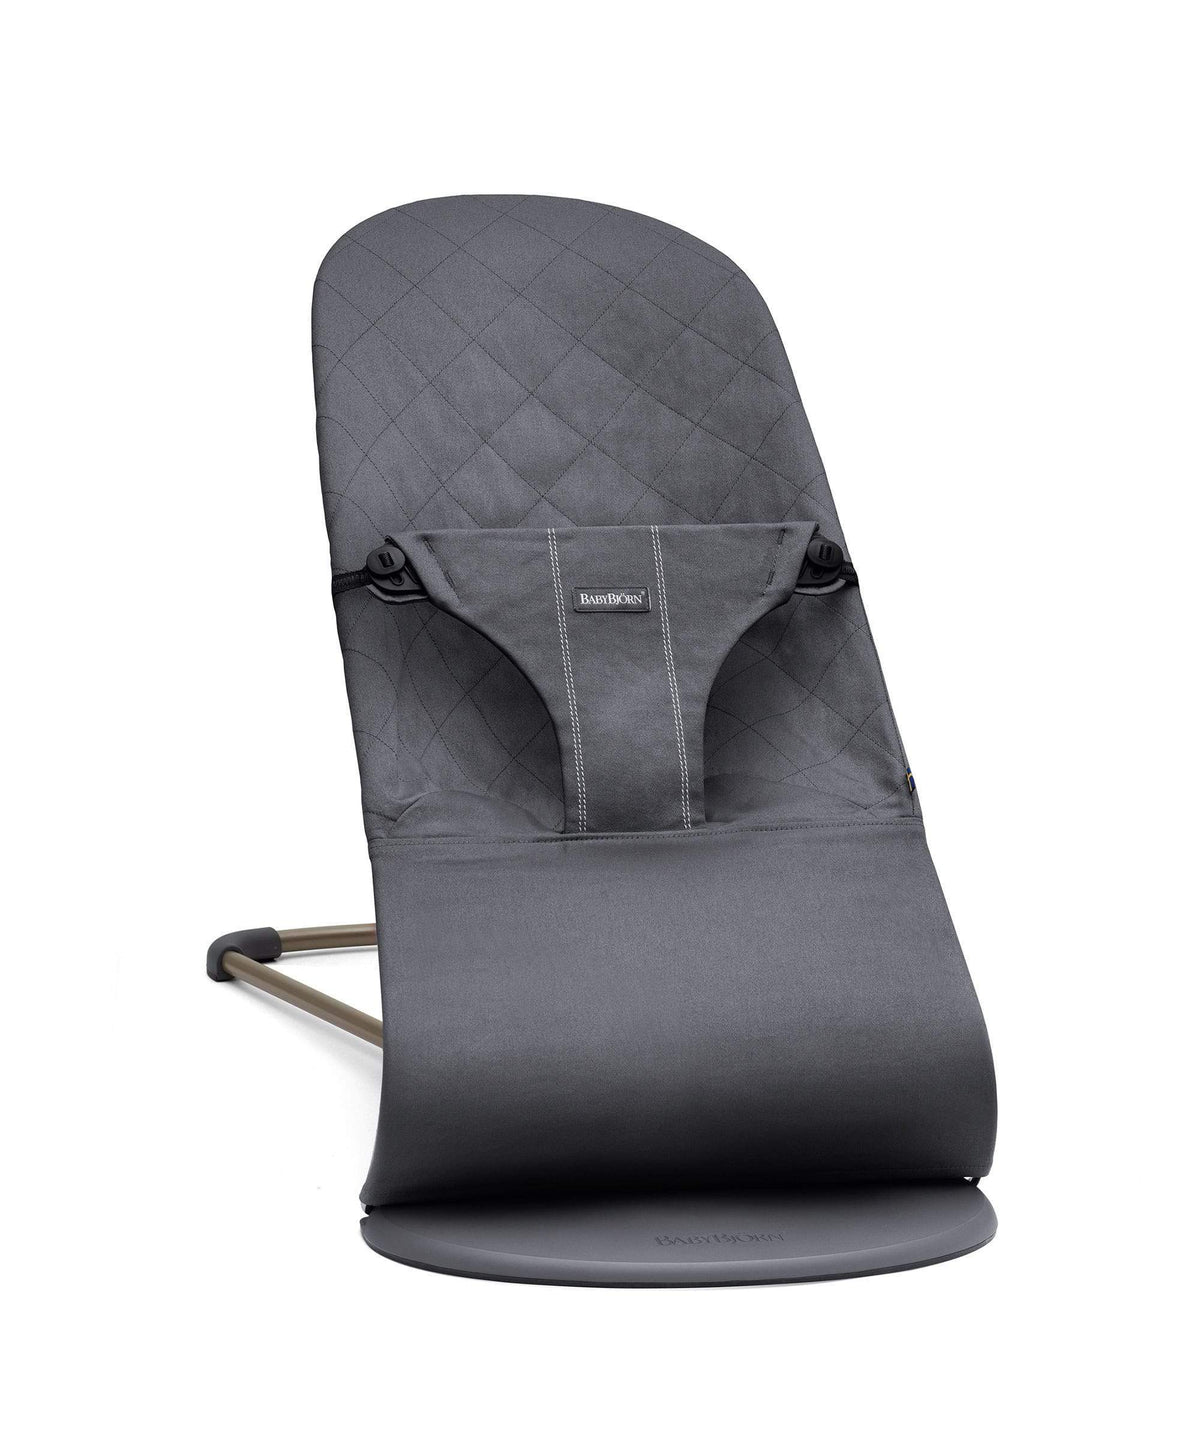 Babybjorn Bouncer Bliss Anthracite | Toys & Gifts – Mamas & Papas UK